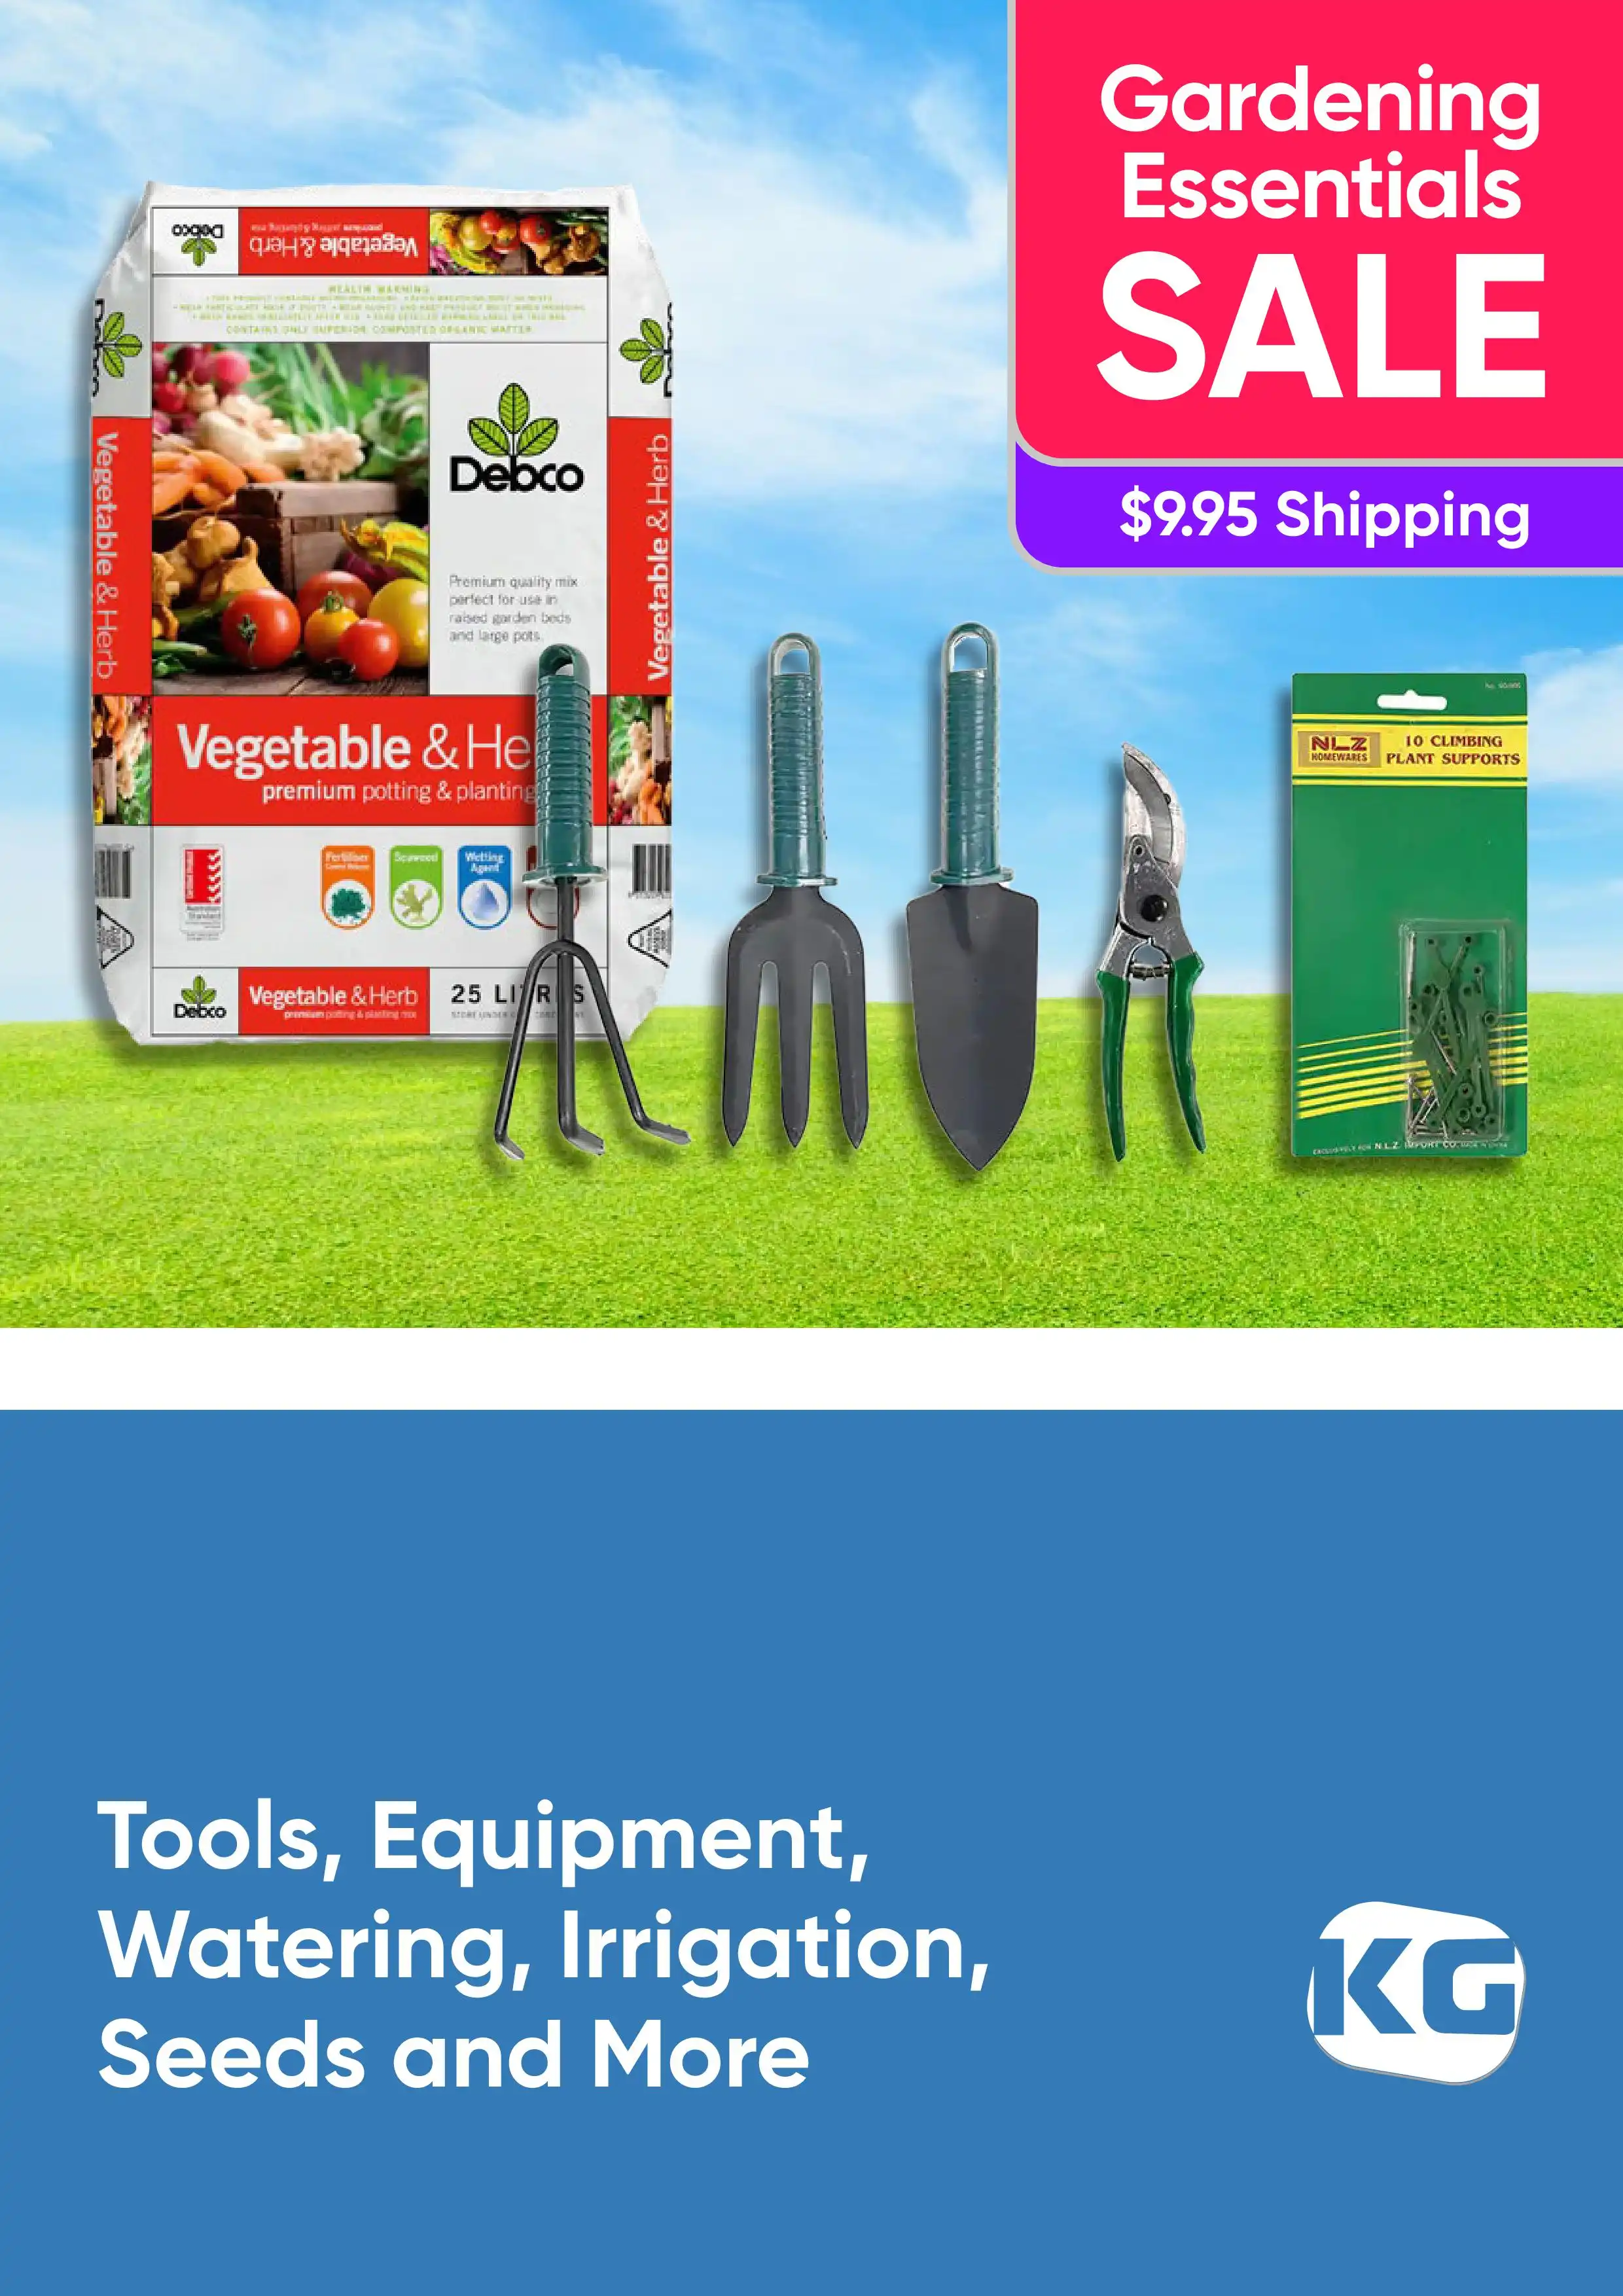 Gardening Tools, Equipment, Watering, Irrigation, Seeds and More